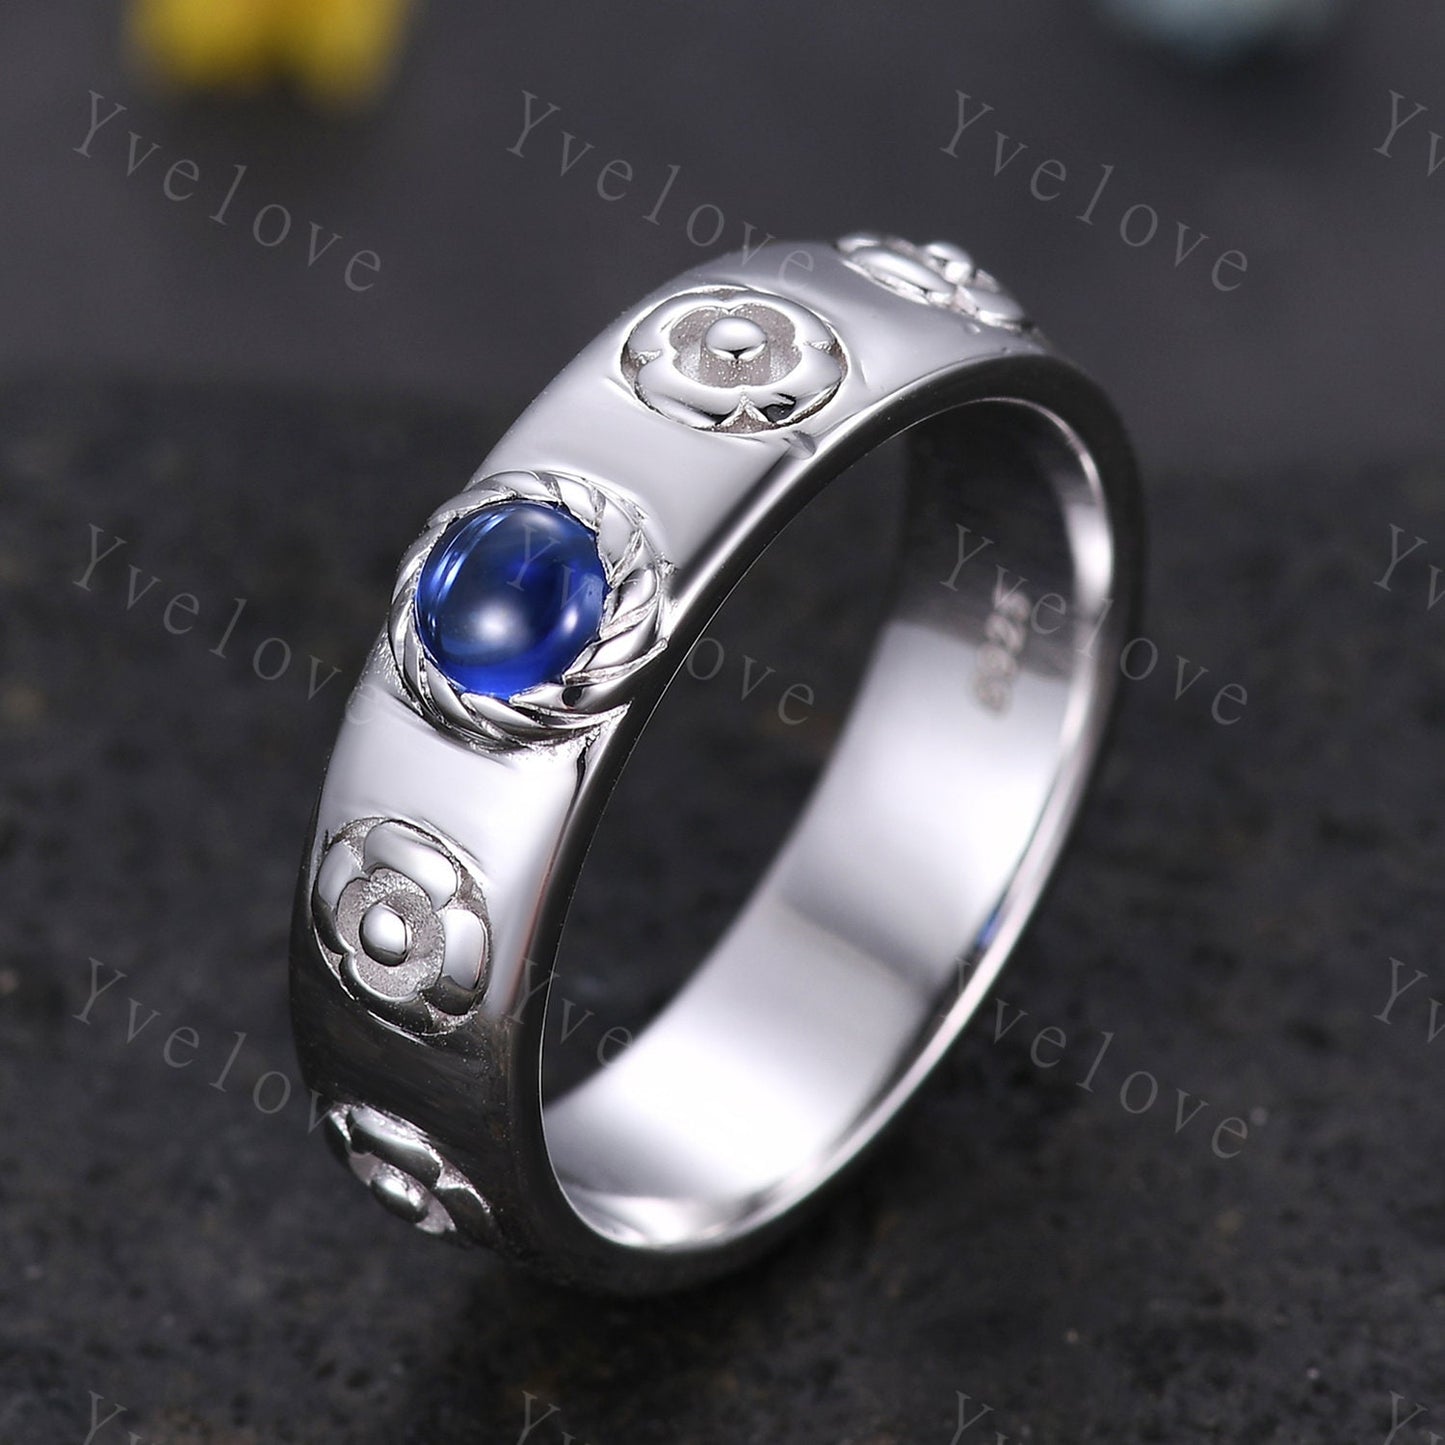 Howls Moving Castle Ring 4mm Round Natural Blue Sapphire Wedding Band S925 Silver Ring Howl's Ring Sophie's Ring Stacking Matching Band Gift White